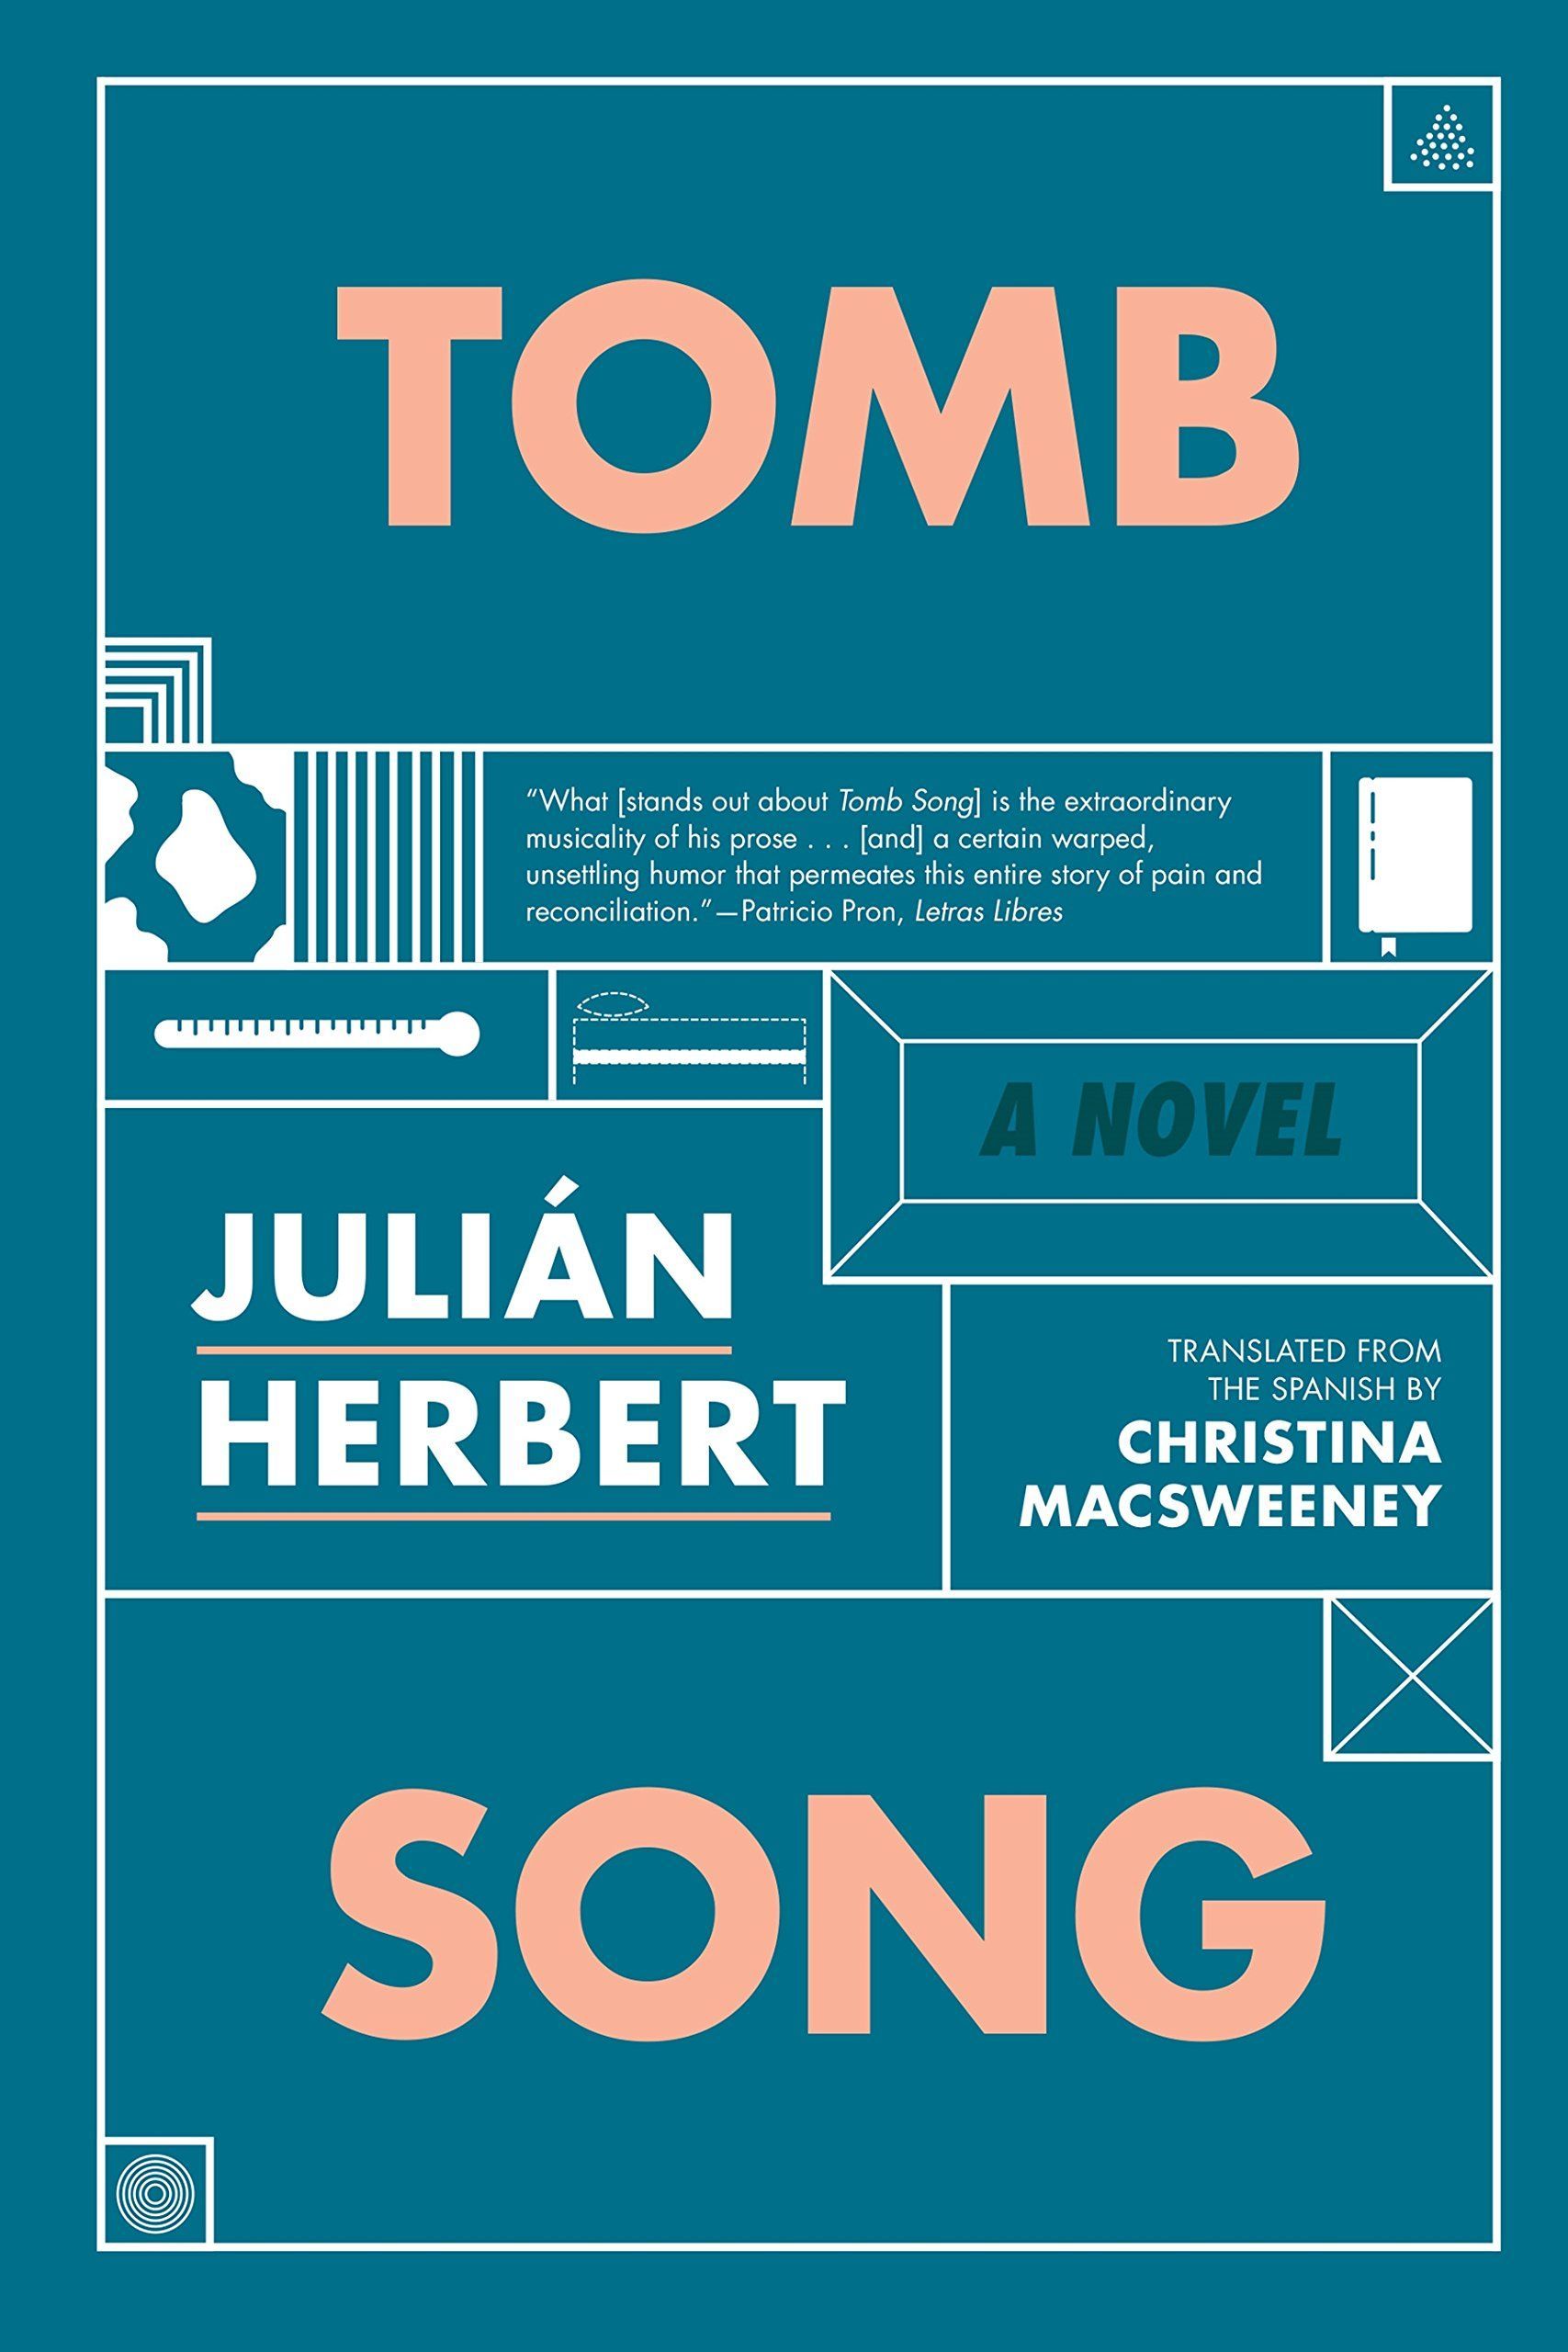 The Violence of Autobiography: Julián Herbert’s “Tomb Song”